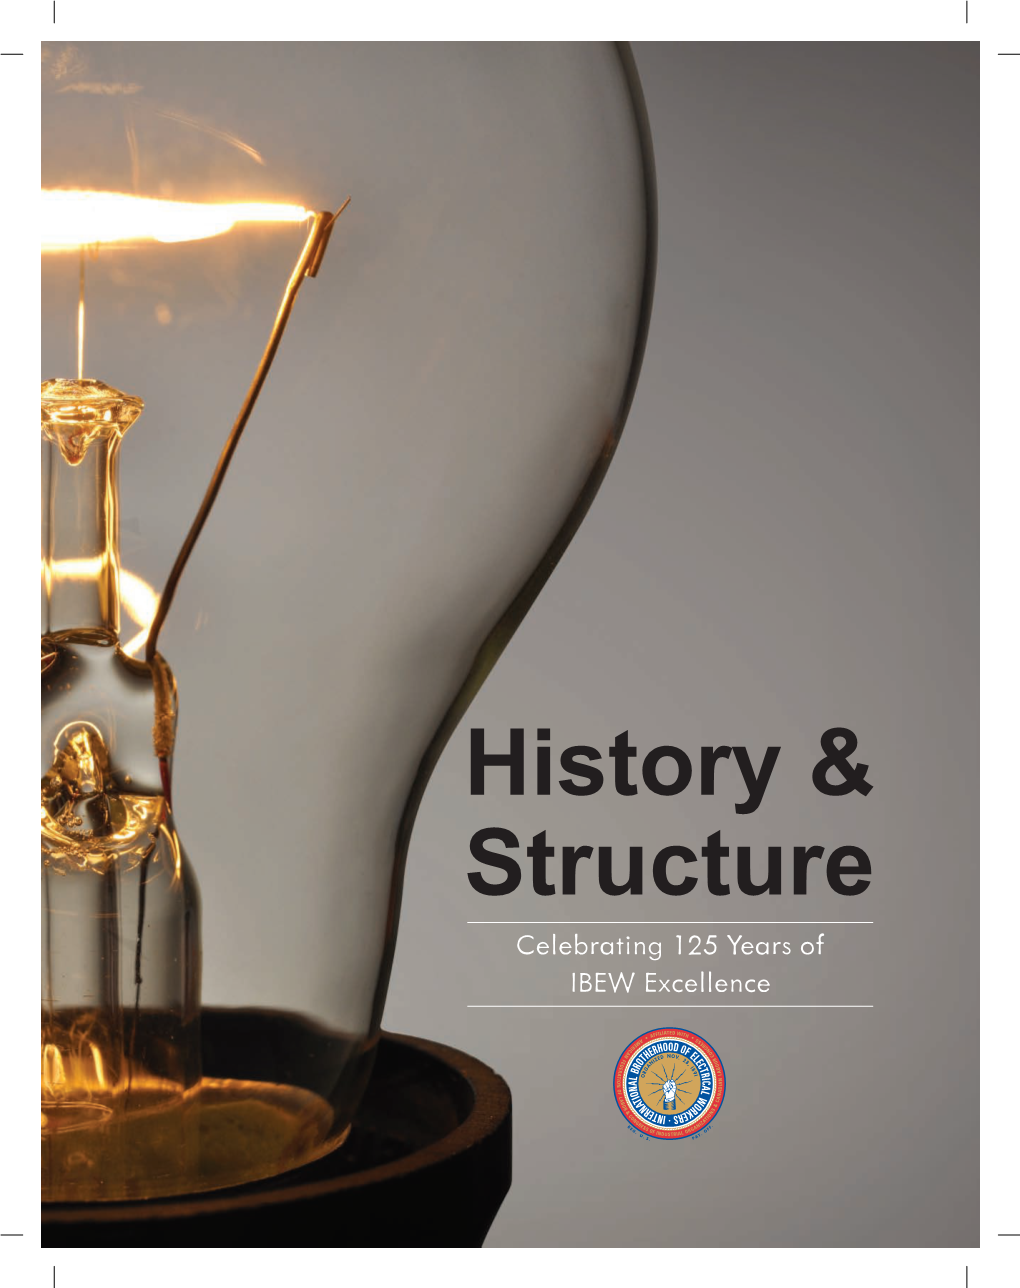 History & Structure